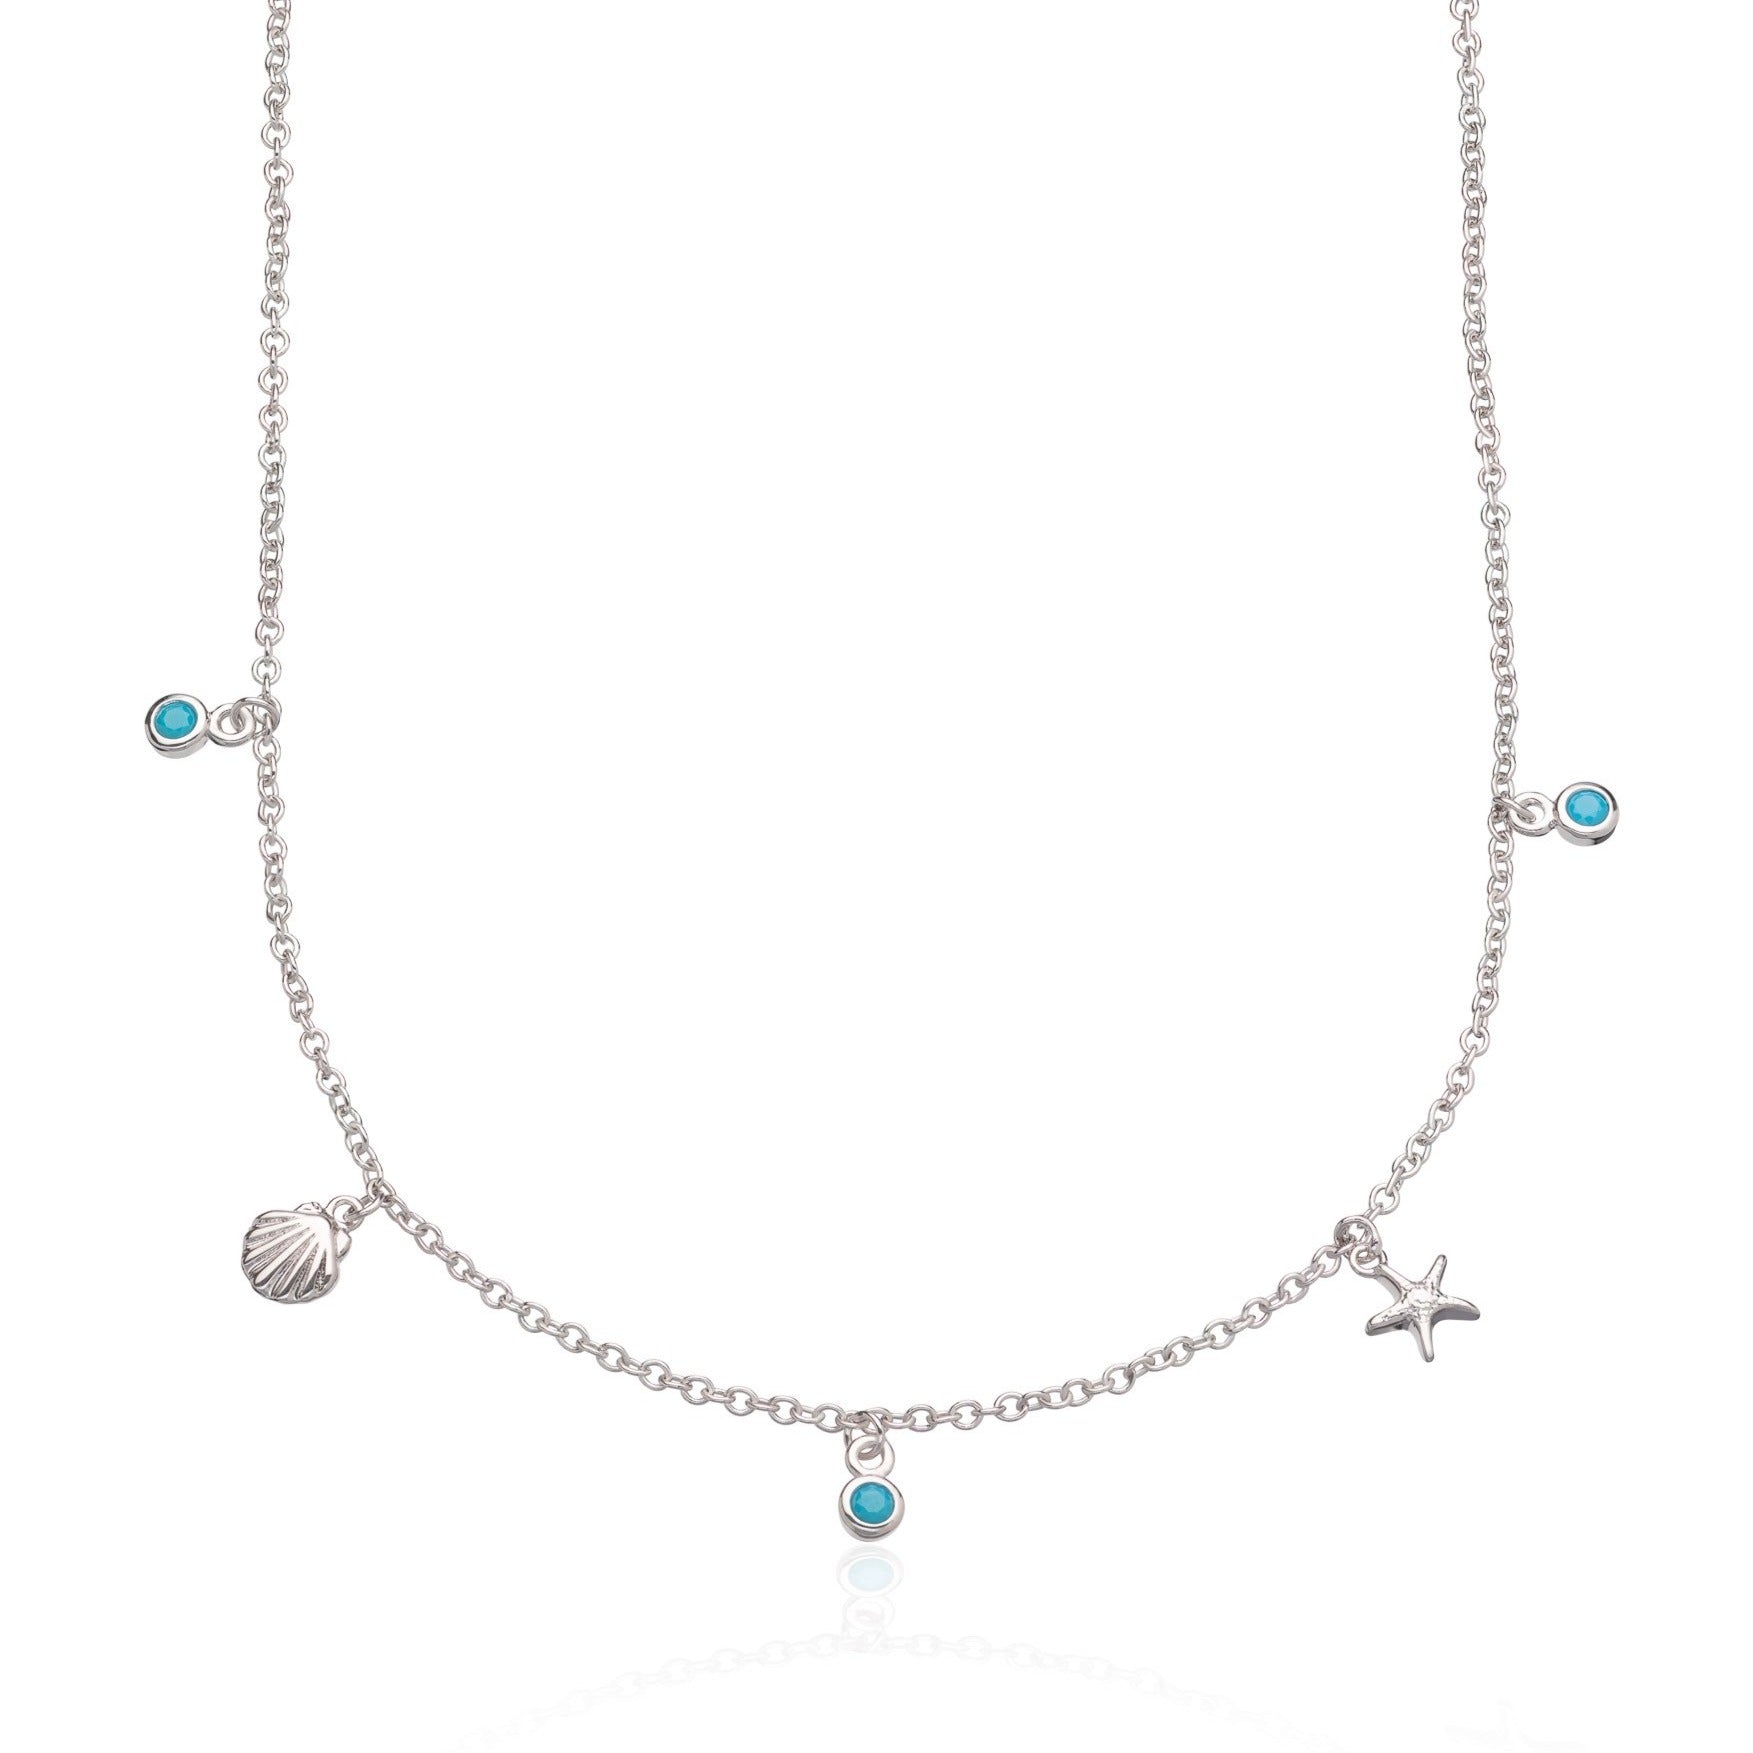 Silver Plated Hannah Martin Seaside Necklace - by Scream Pretty